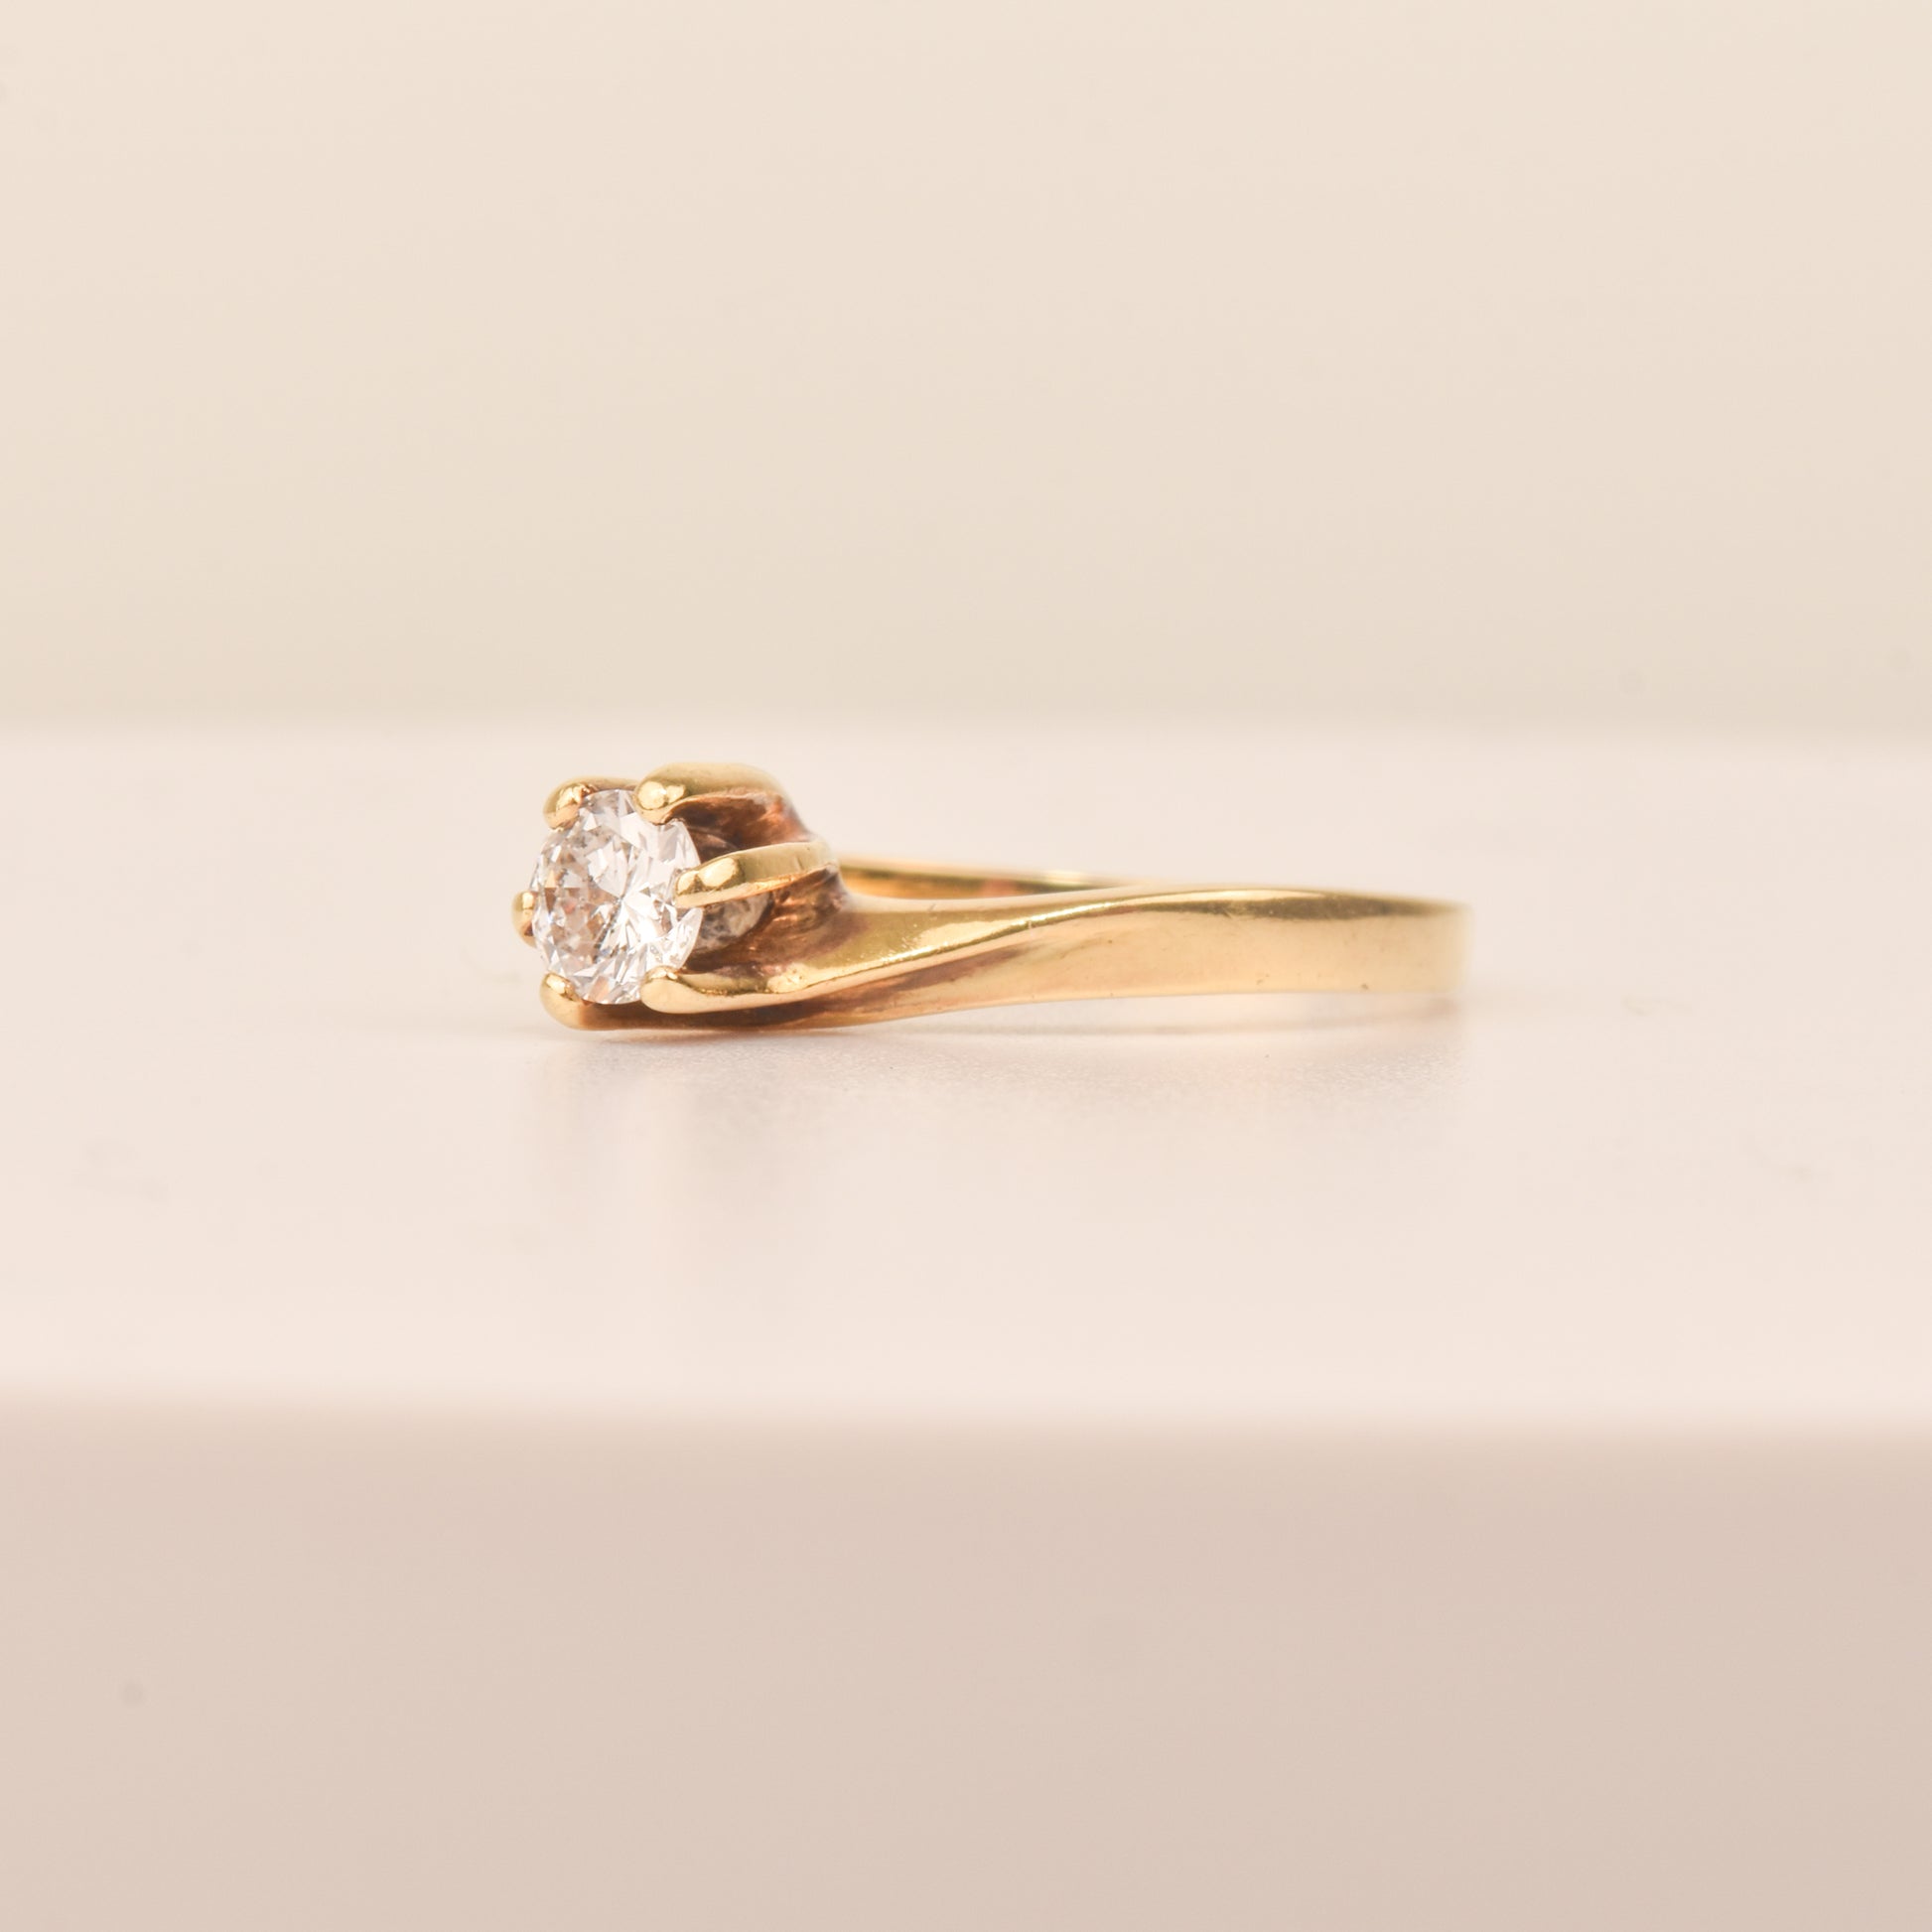 18K yellow gold solitaire engagement ring with a 6-prong spiral setting and diamond, size 7.5 US, on a neutral background.